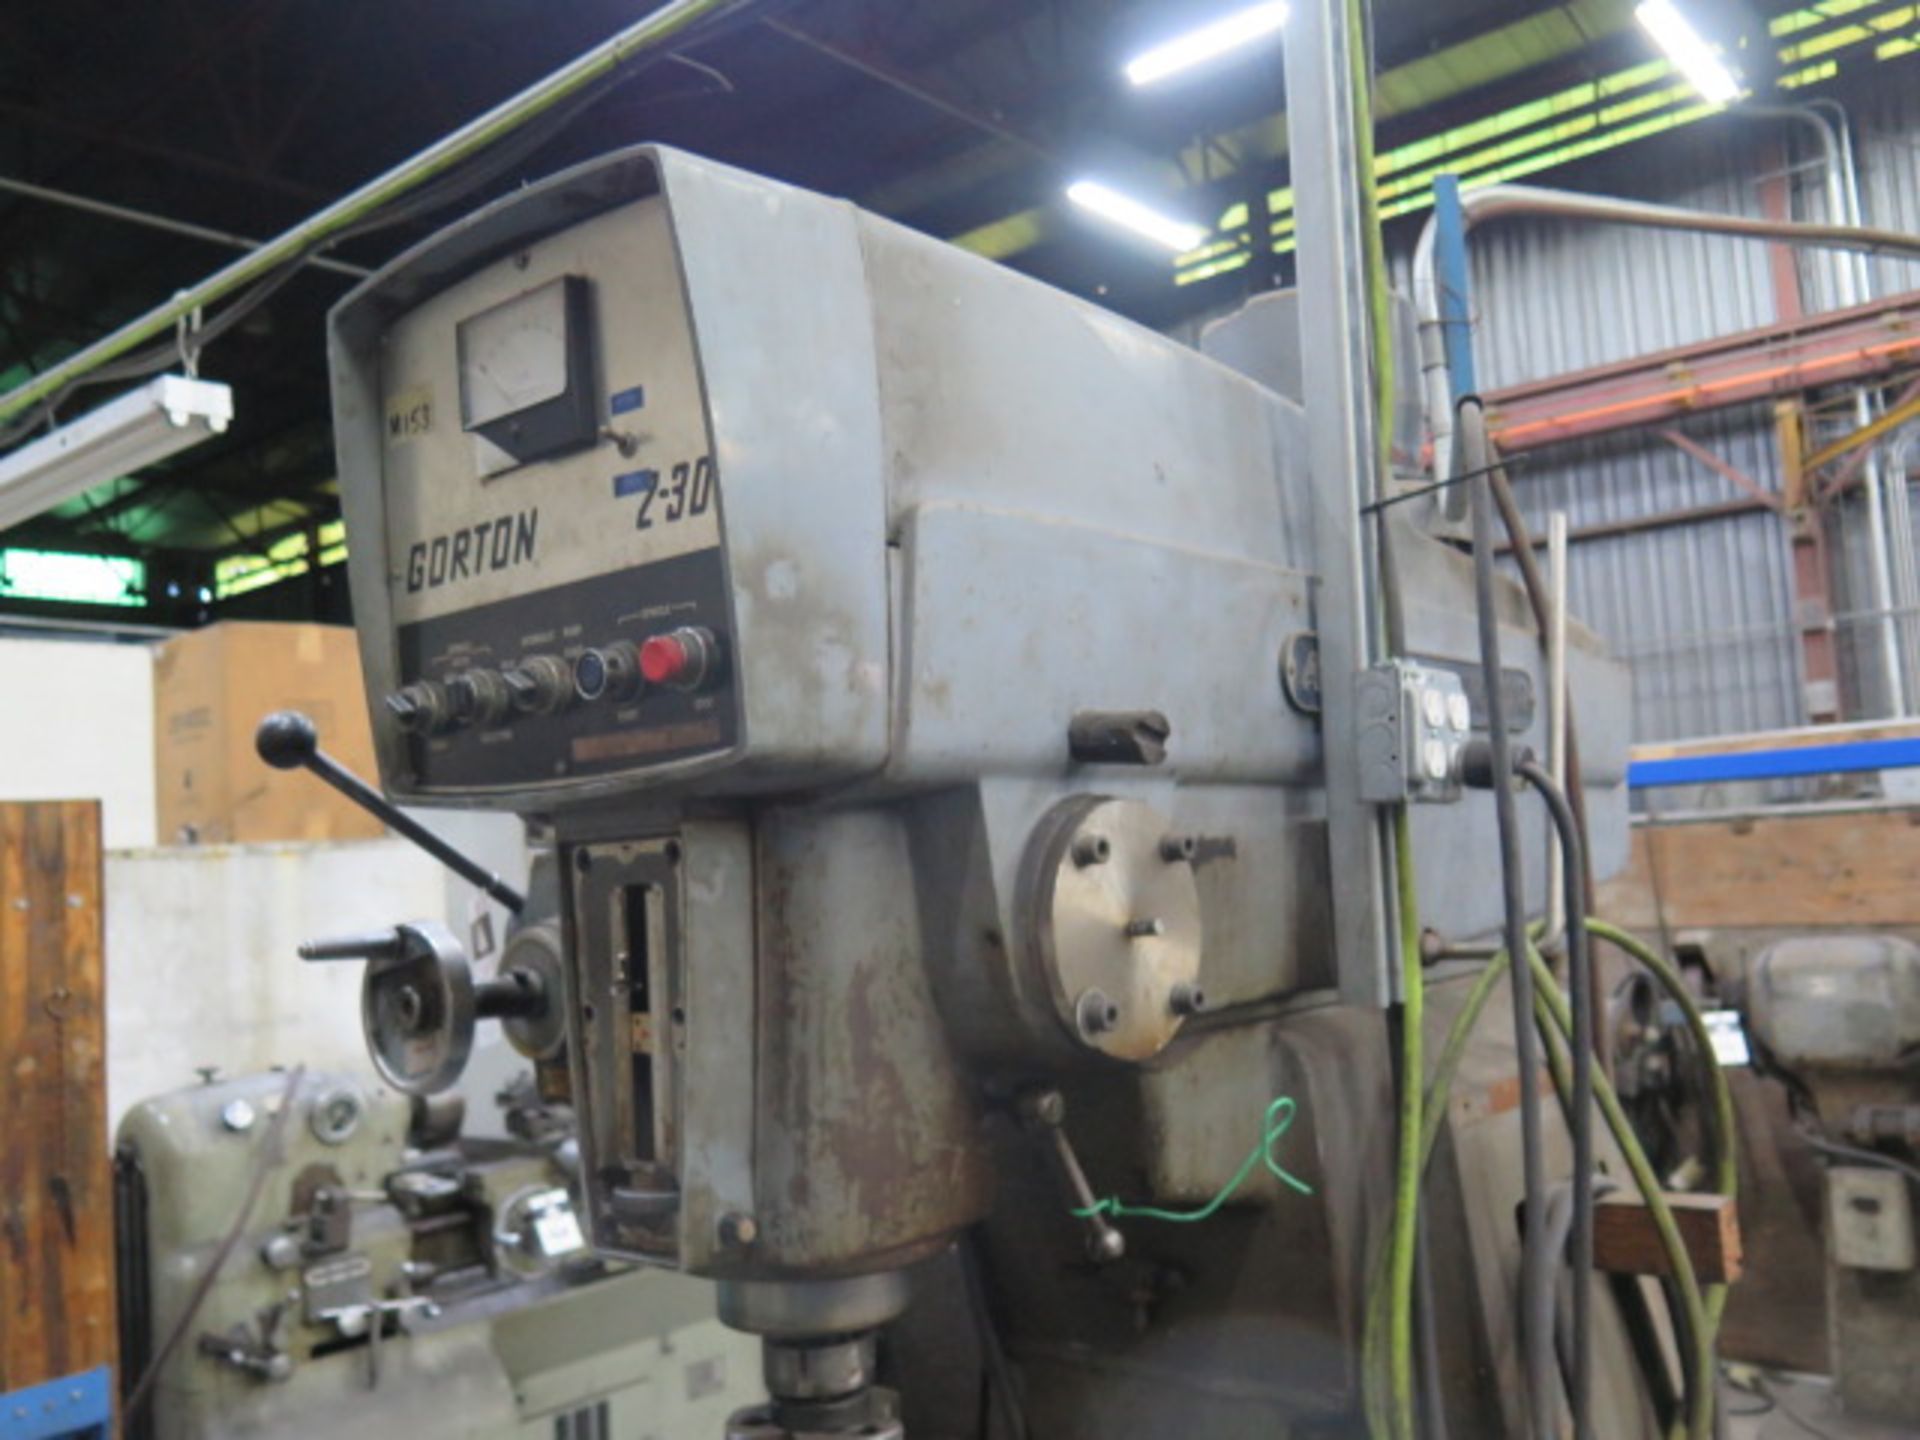 Gorton 2-30 Auto Trace Master Vertical Mill w/ Universal Kwik-Switch Taper Spindle, SOLD AS IS - Image 5 of 9